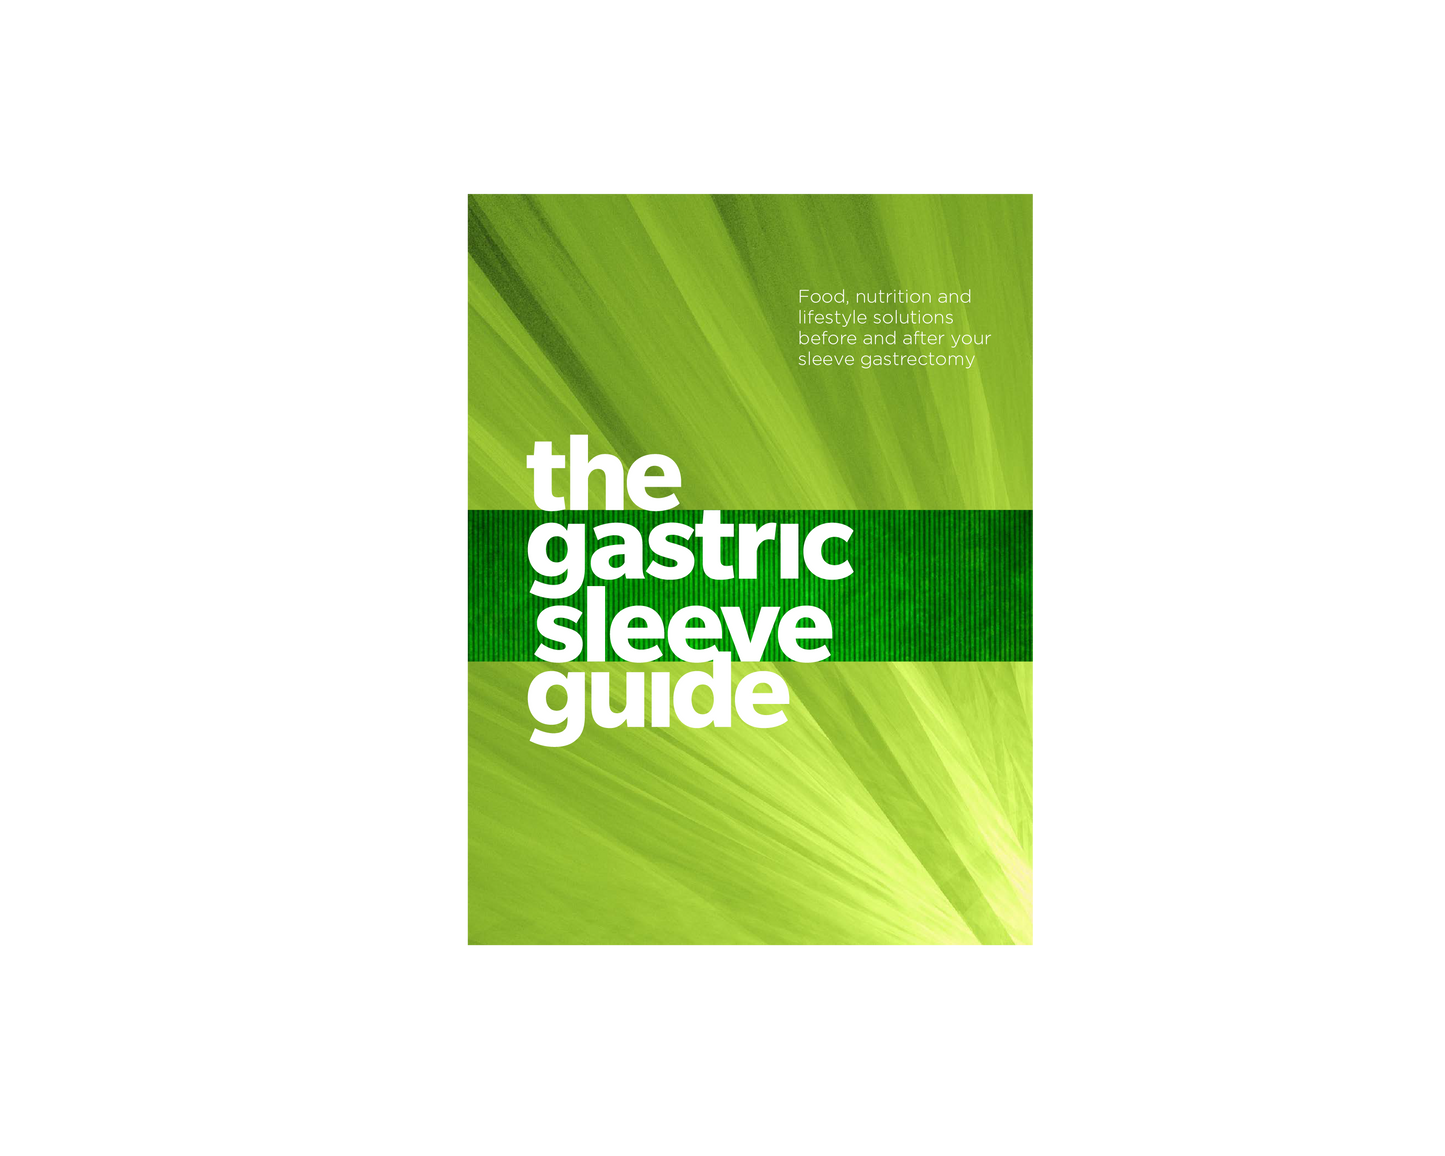 The Gastric Sleeve Guide - WLS Book